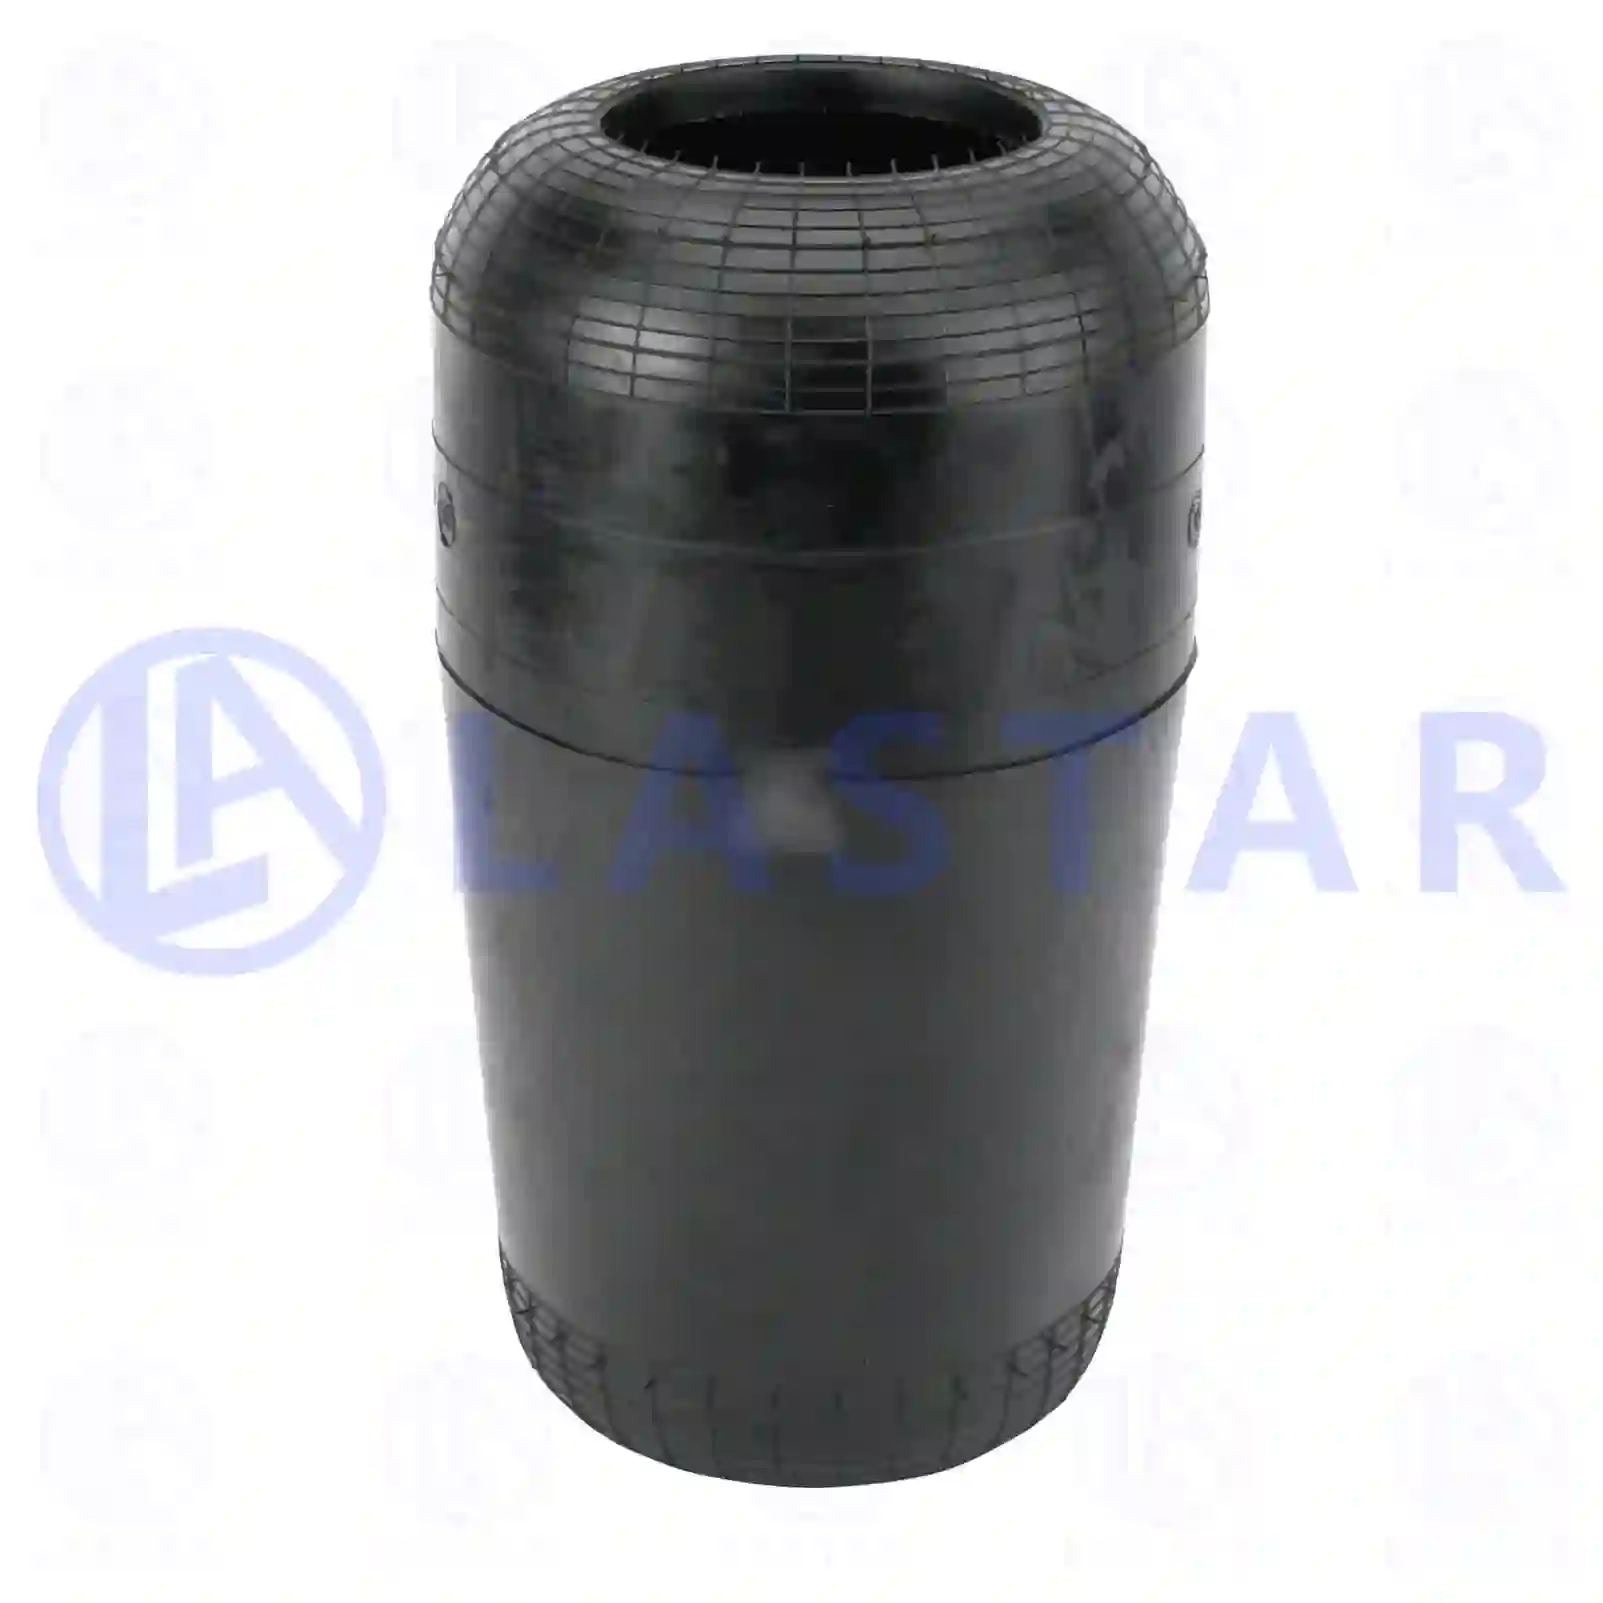 Air spring, without piston, 77728225, 6283230092, ZG40829-0008, ||  77728225 Lastar Spare Part | Truck Spare Parts, Auotomotive Spare Parts Air spring, without piston, 77728225, 6283230092, ZG40829-0008, ||  77728225 Lastar Spare Part | Truck Spare Parts, Auotomotive Spare Parts